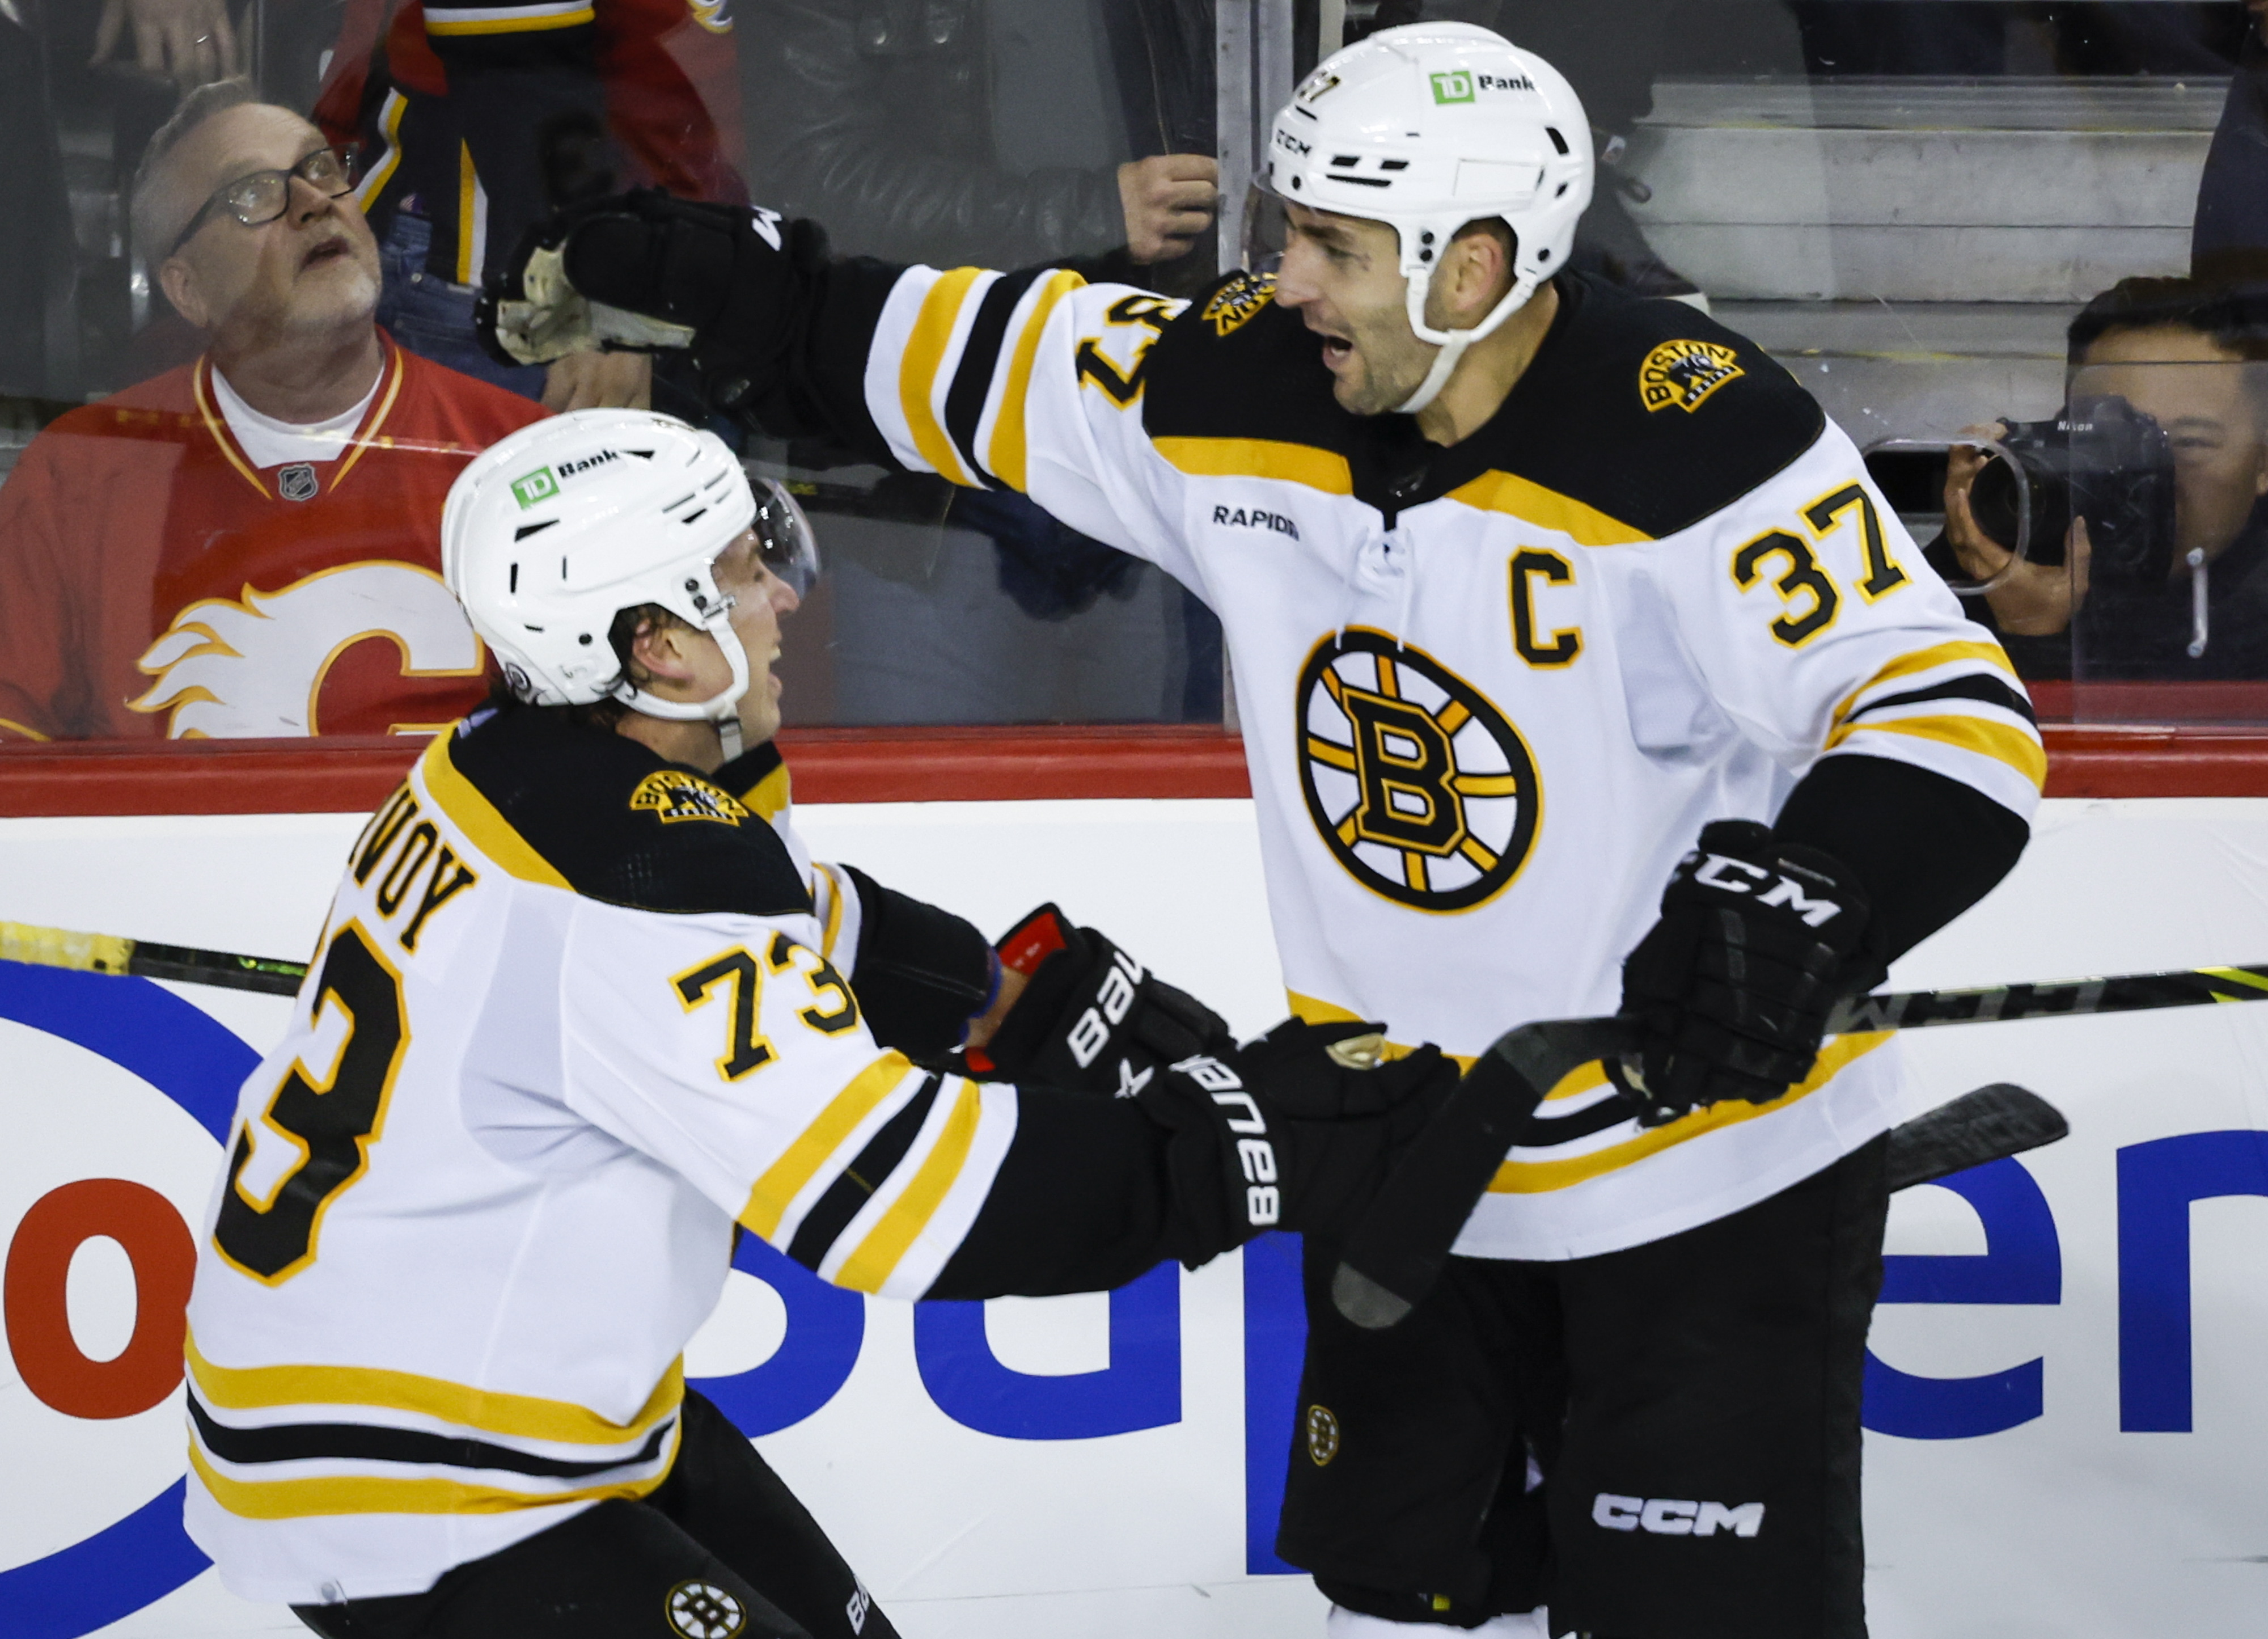 NHL Saturday Devils vs. Bruins betting preview and best bet